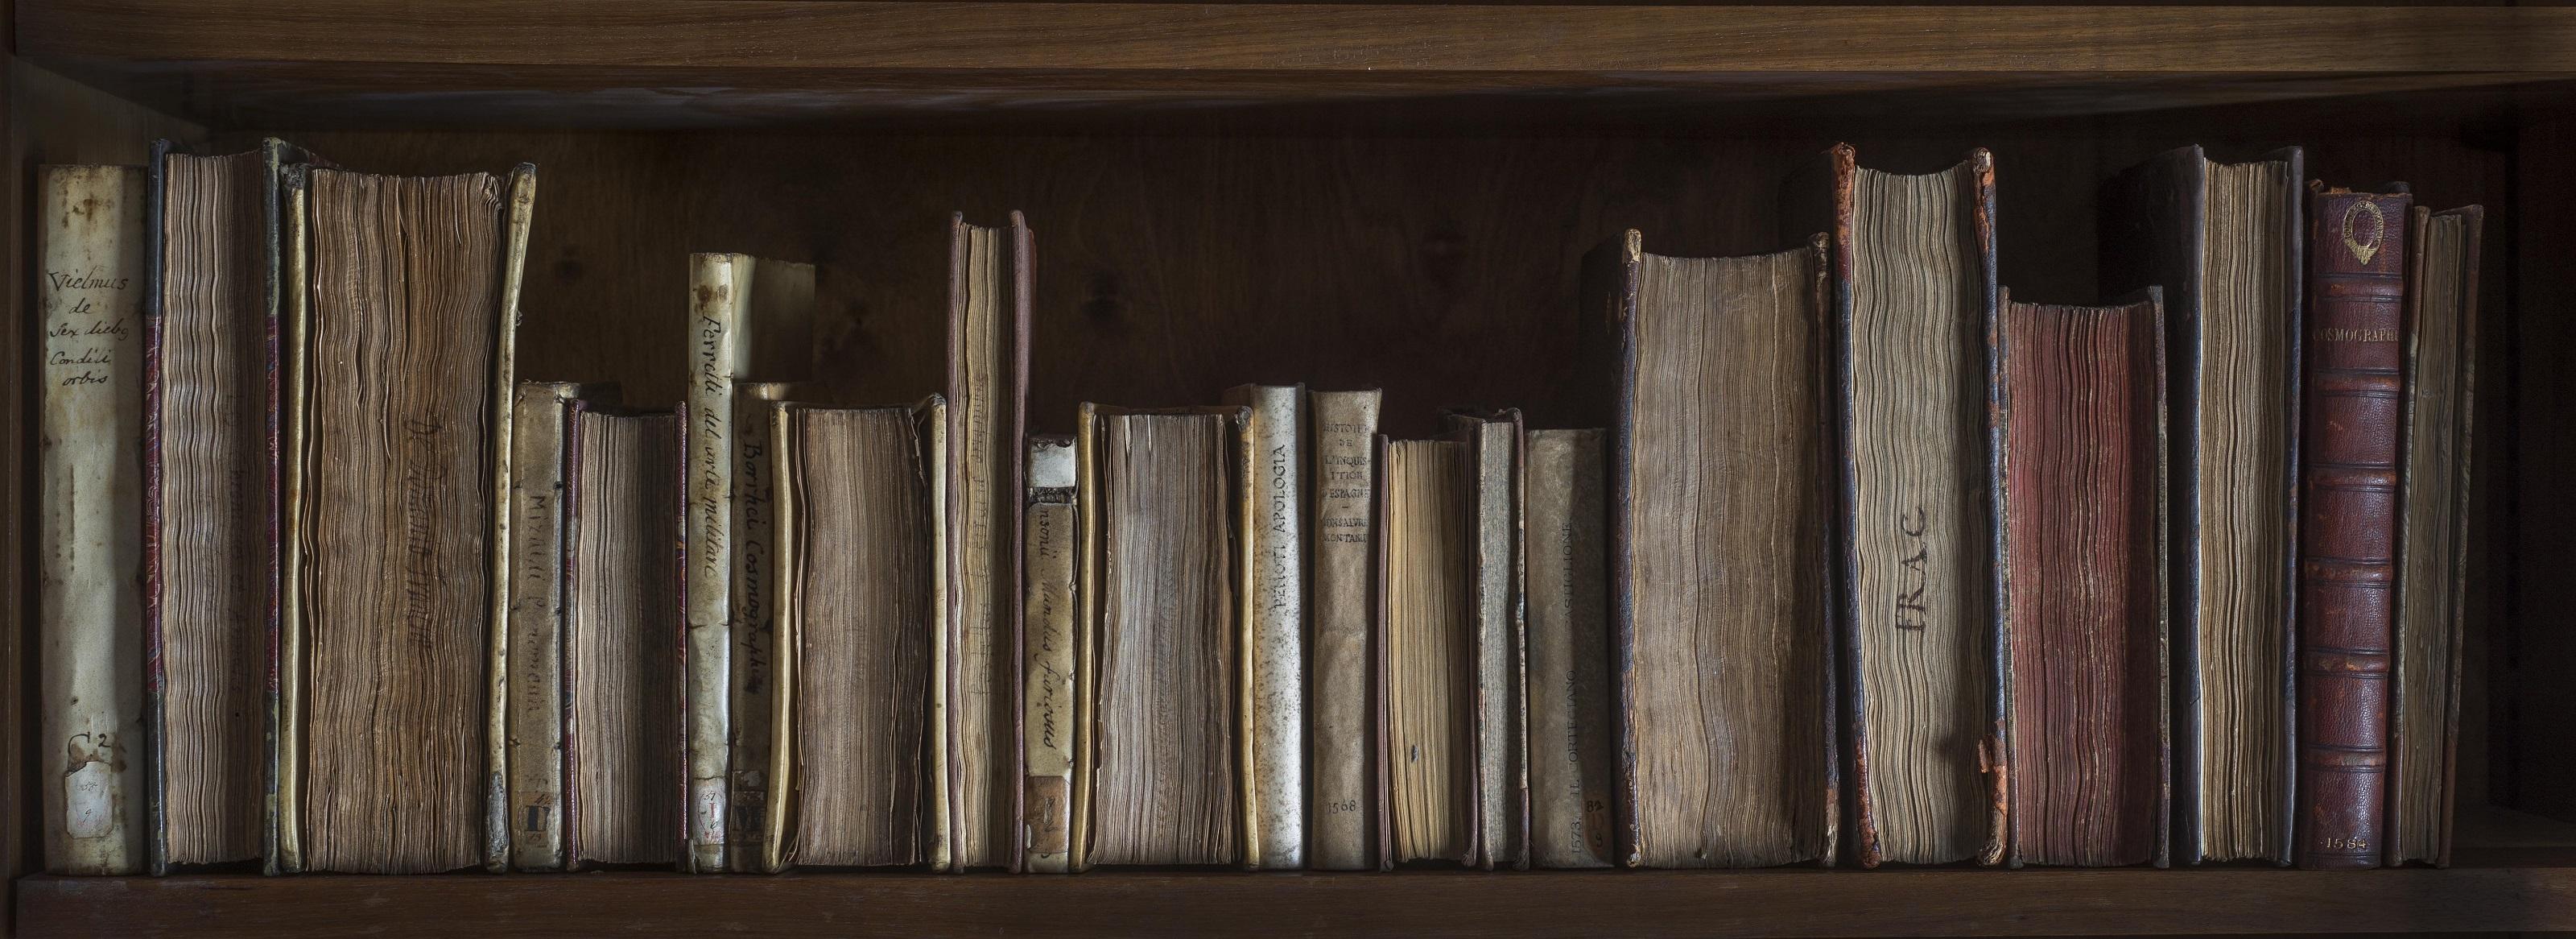 A shelf of books from John Dee’s library. © Royal College of Physicians / John Chase